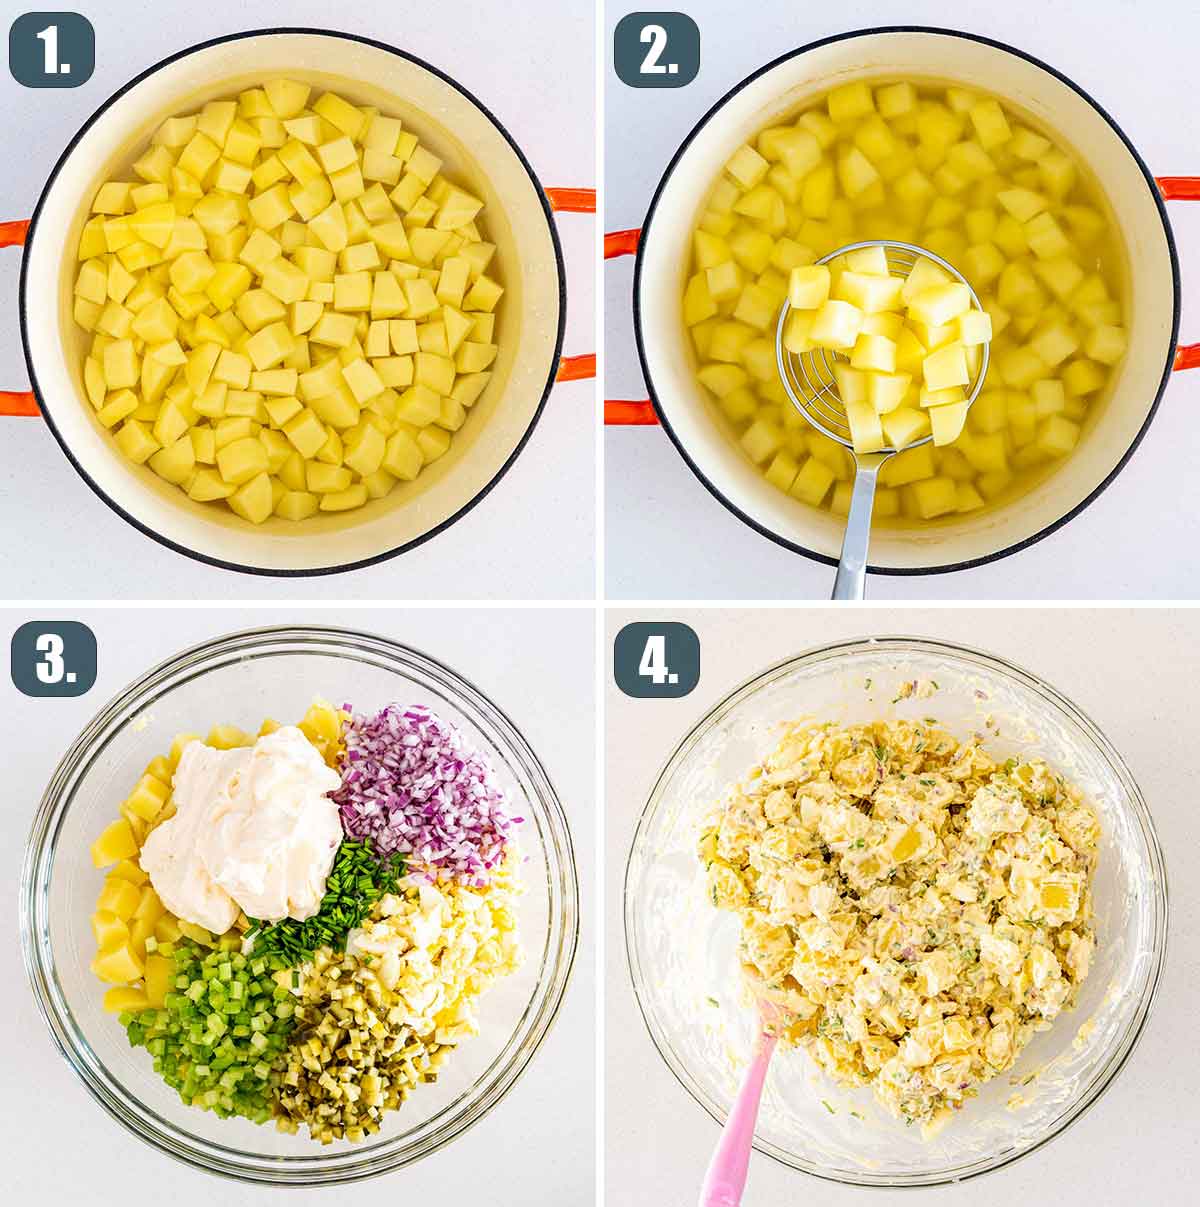 detailed process shots showing how to make potato salad.